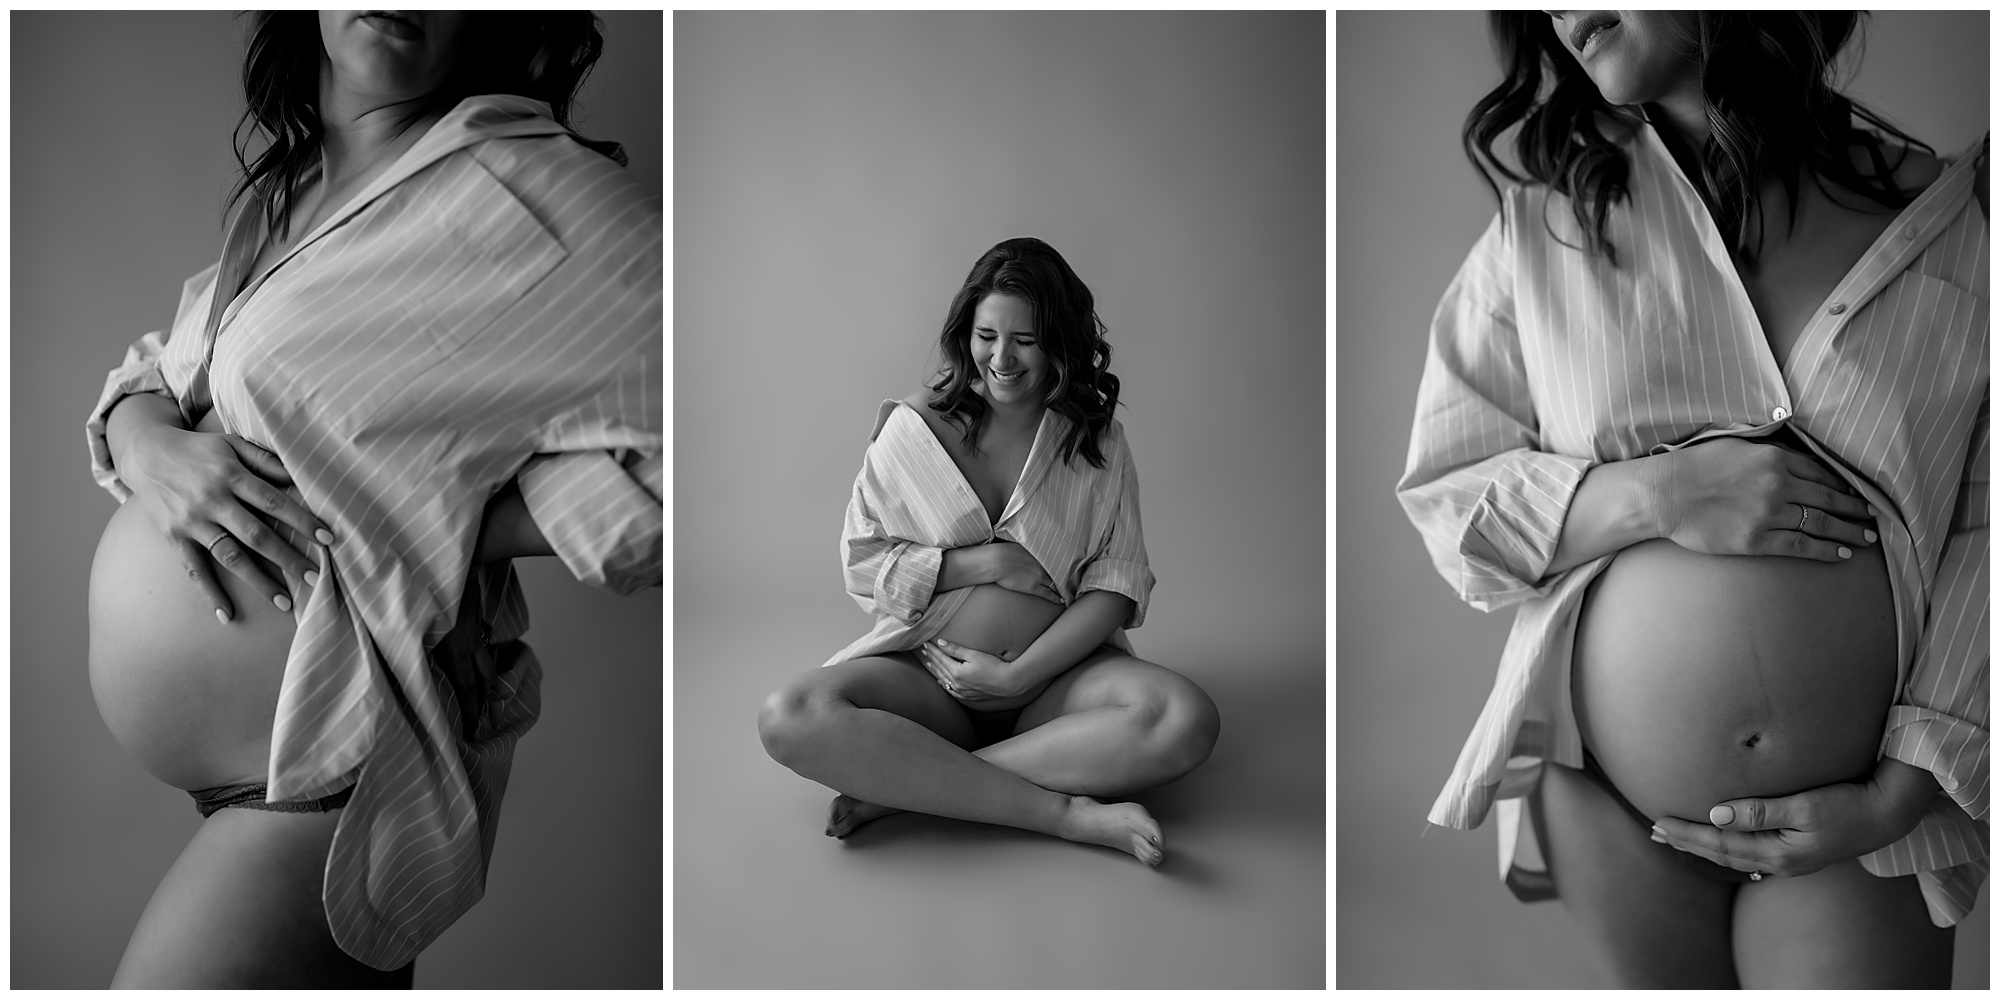 Best Maternity Photoshoot Poses & Outfit Ideas